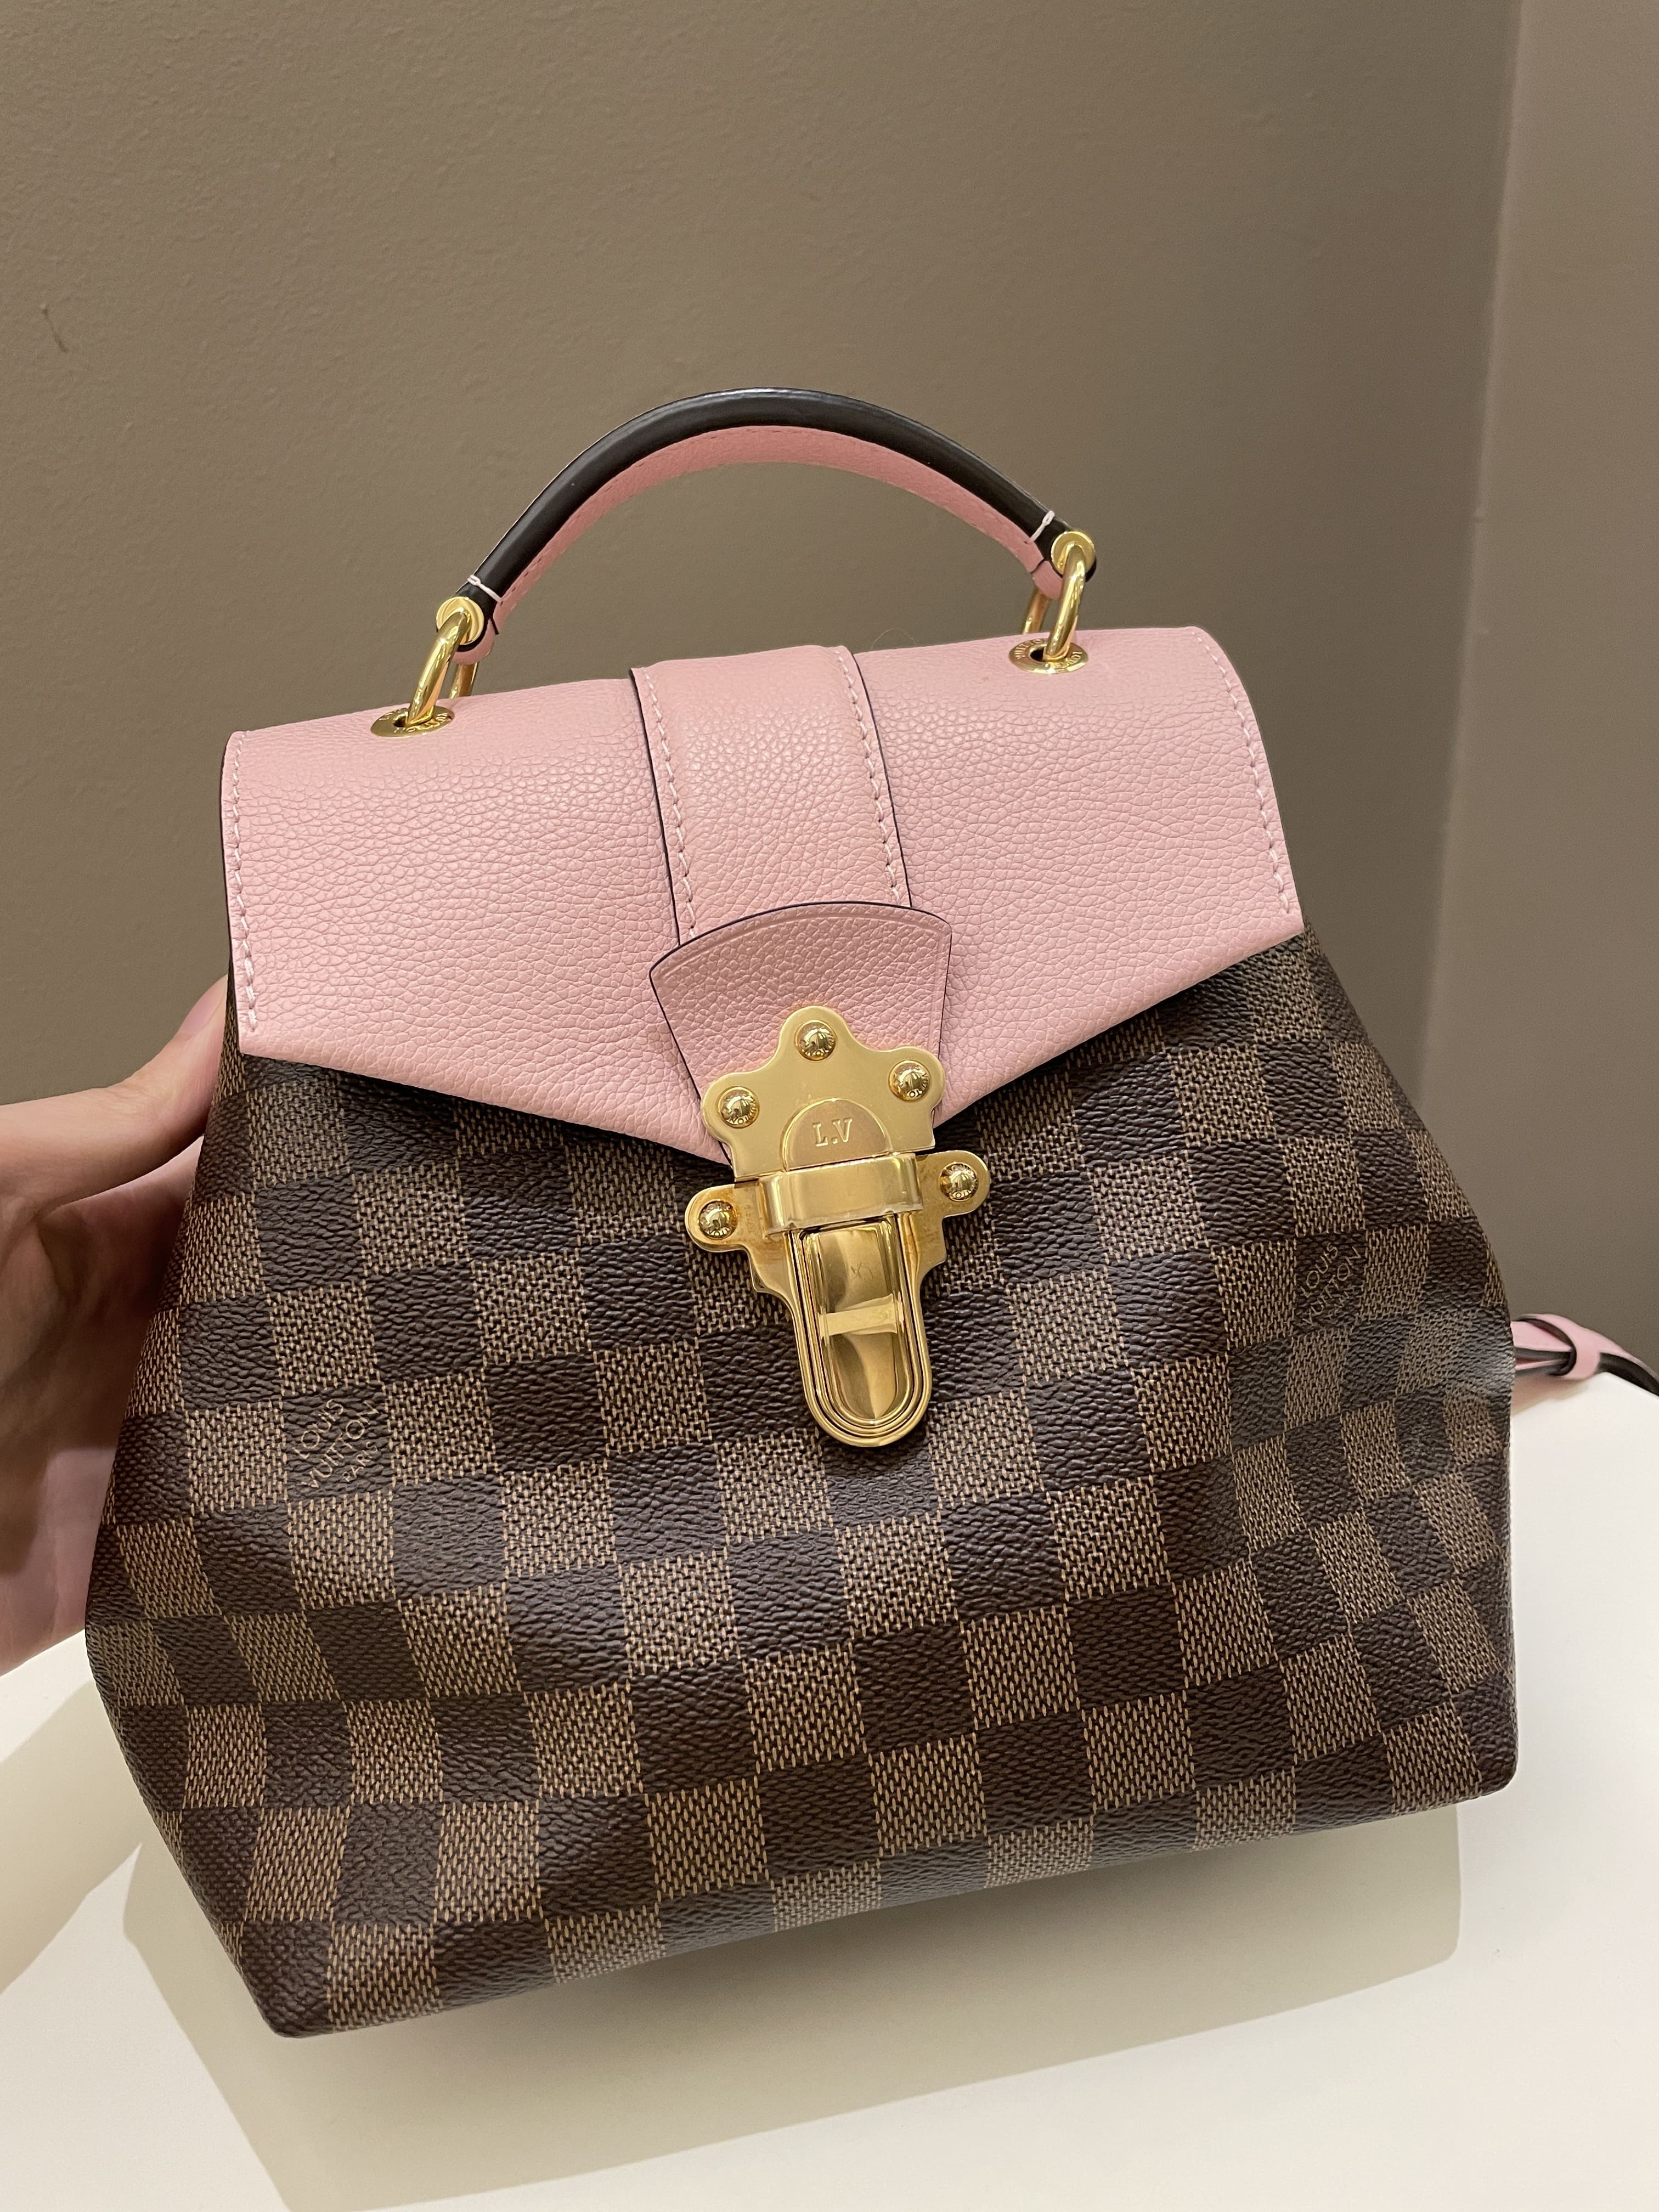 Louis Vuitton Clapton Backpack Damier Brown Canvas Leather Pink Crossbody